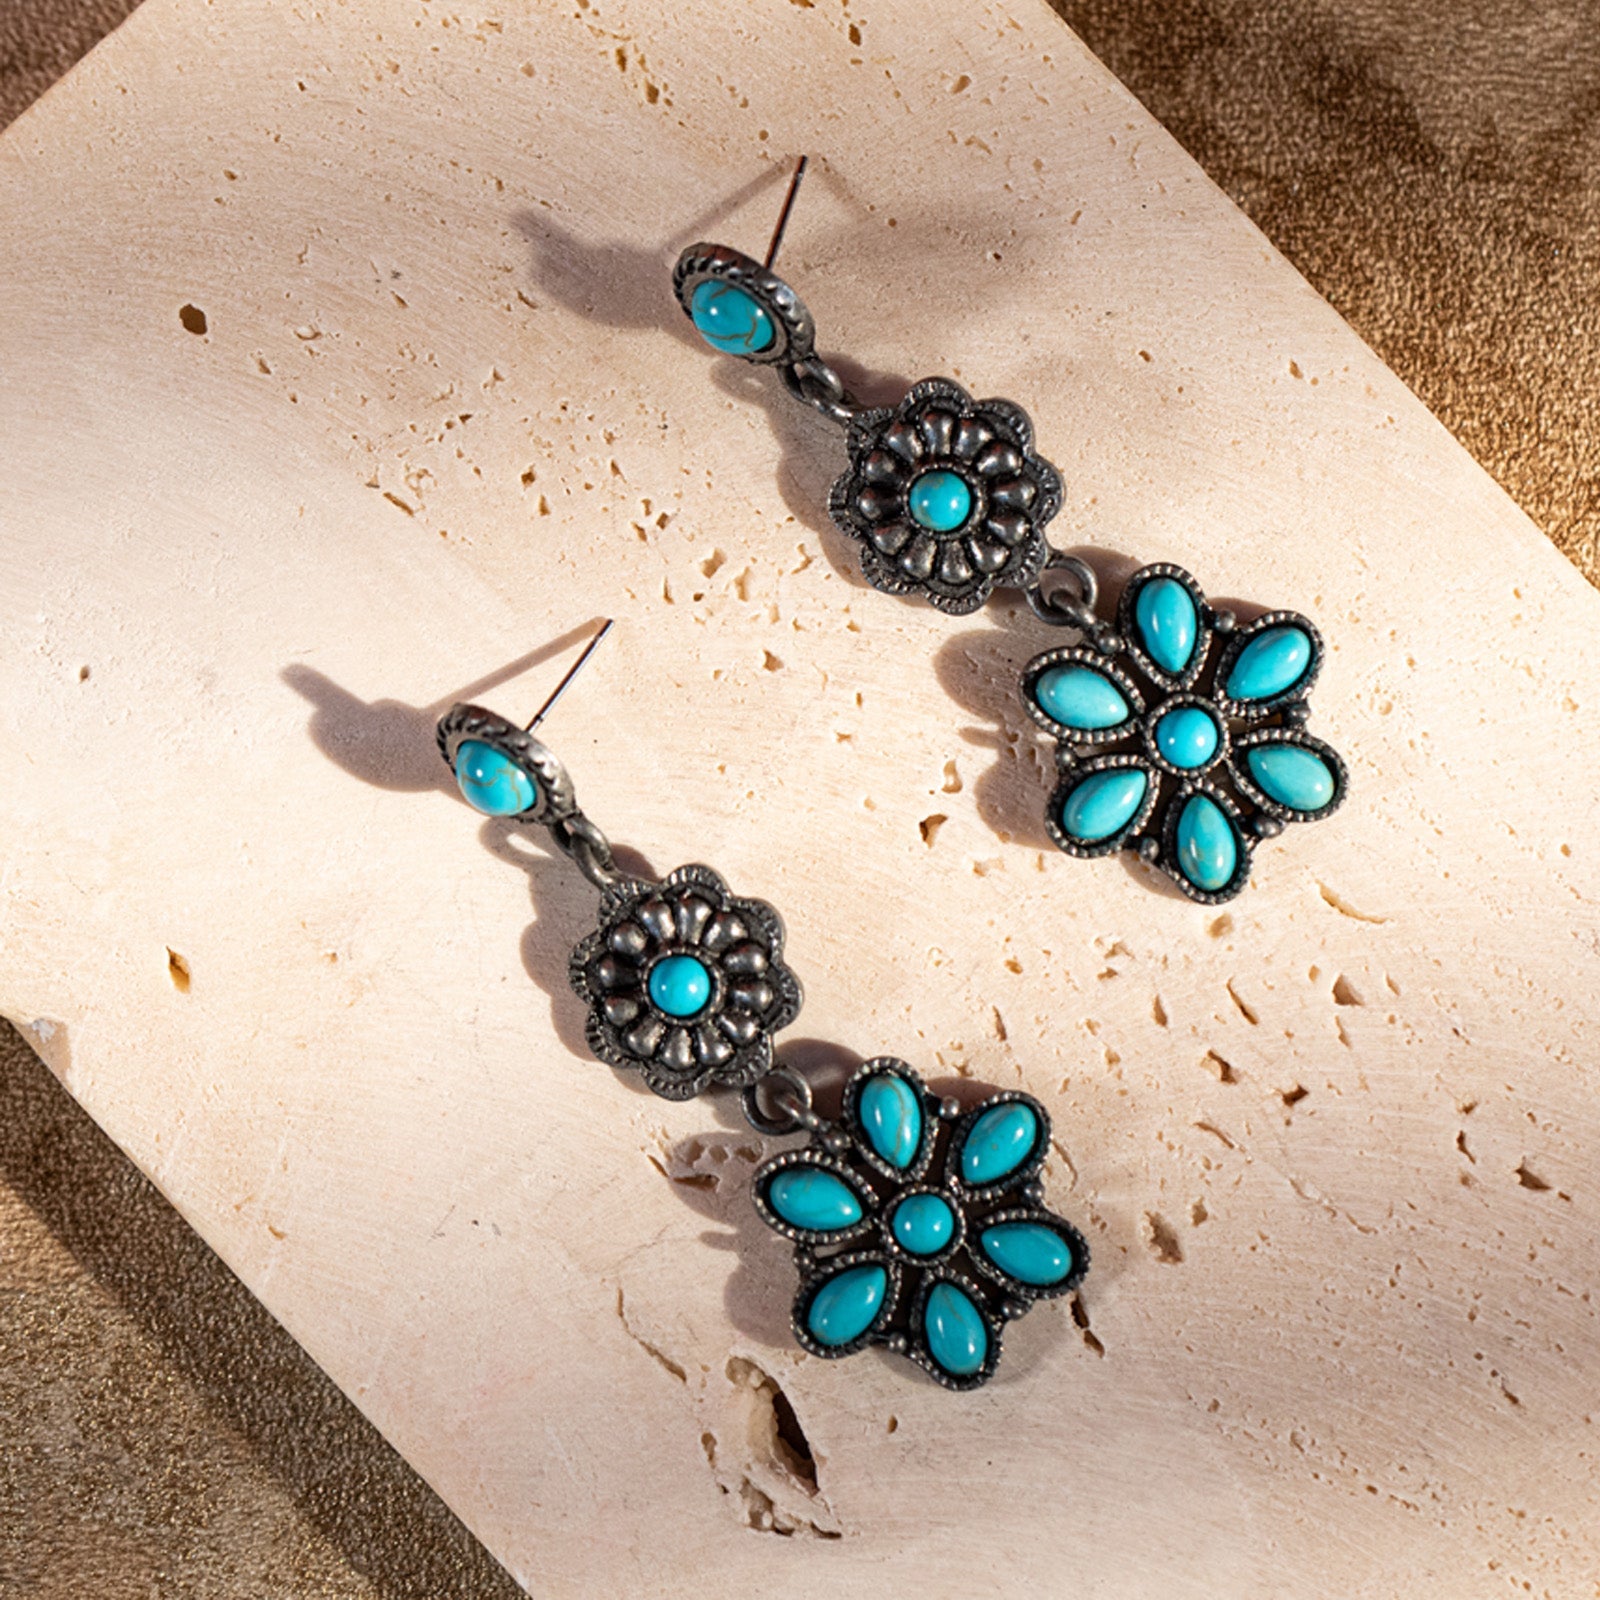 Rustic Couture Turquoise Squash Blossom Drop Earrings - Montana West World